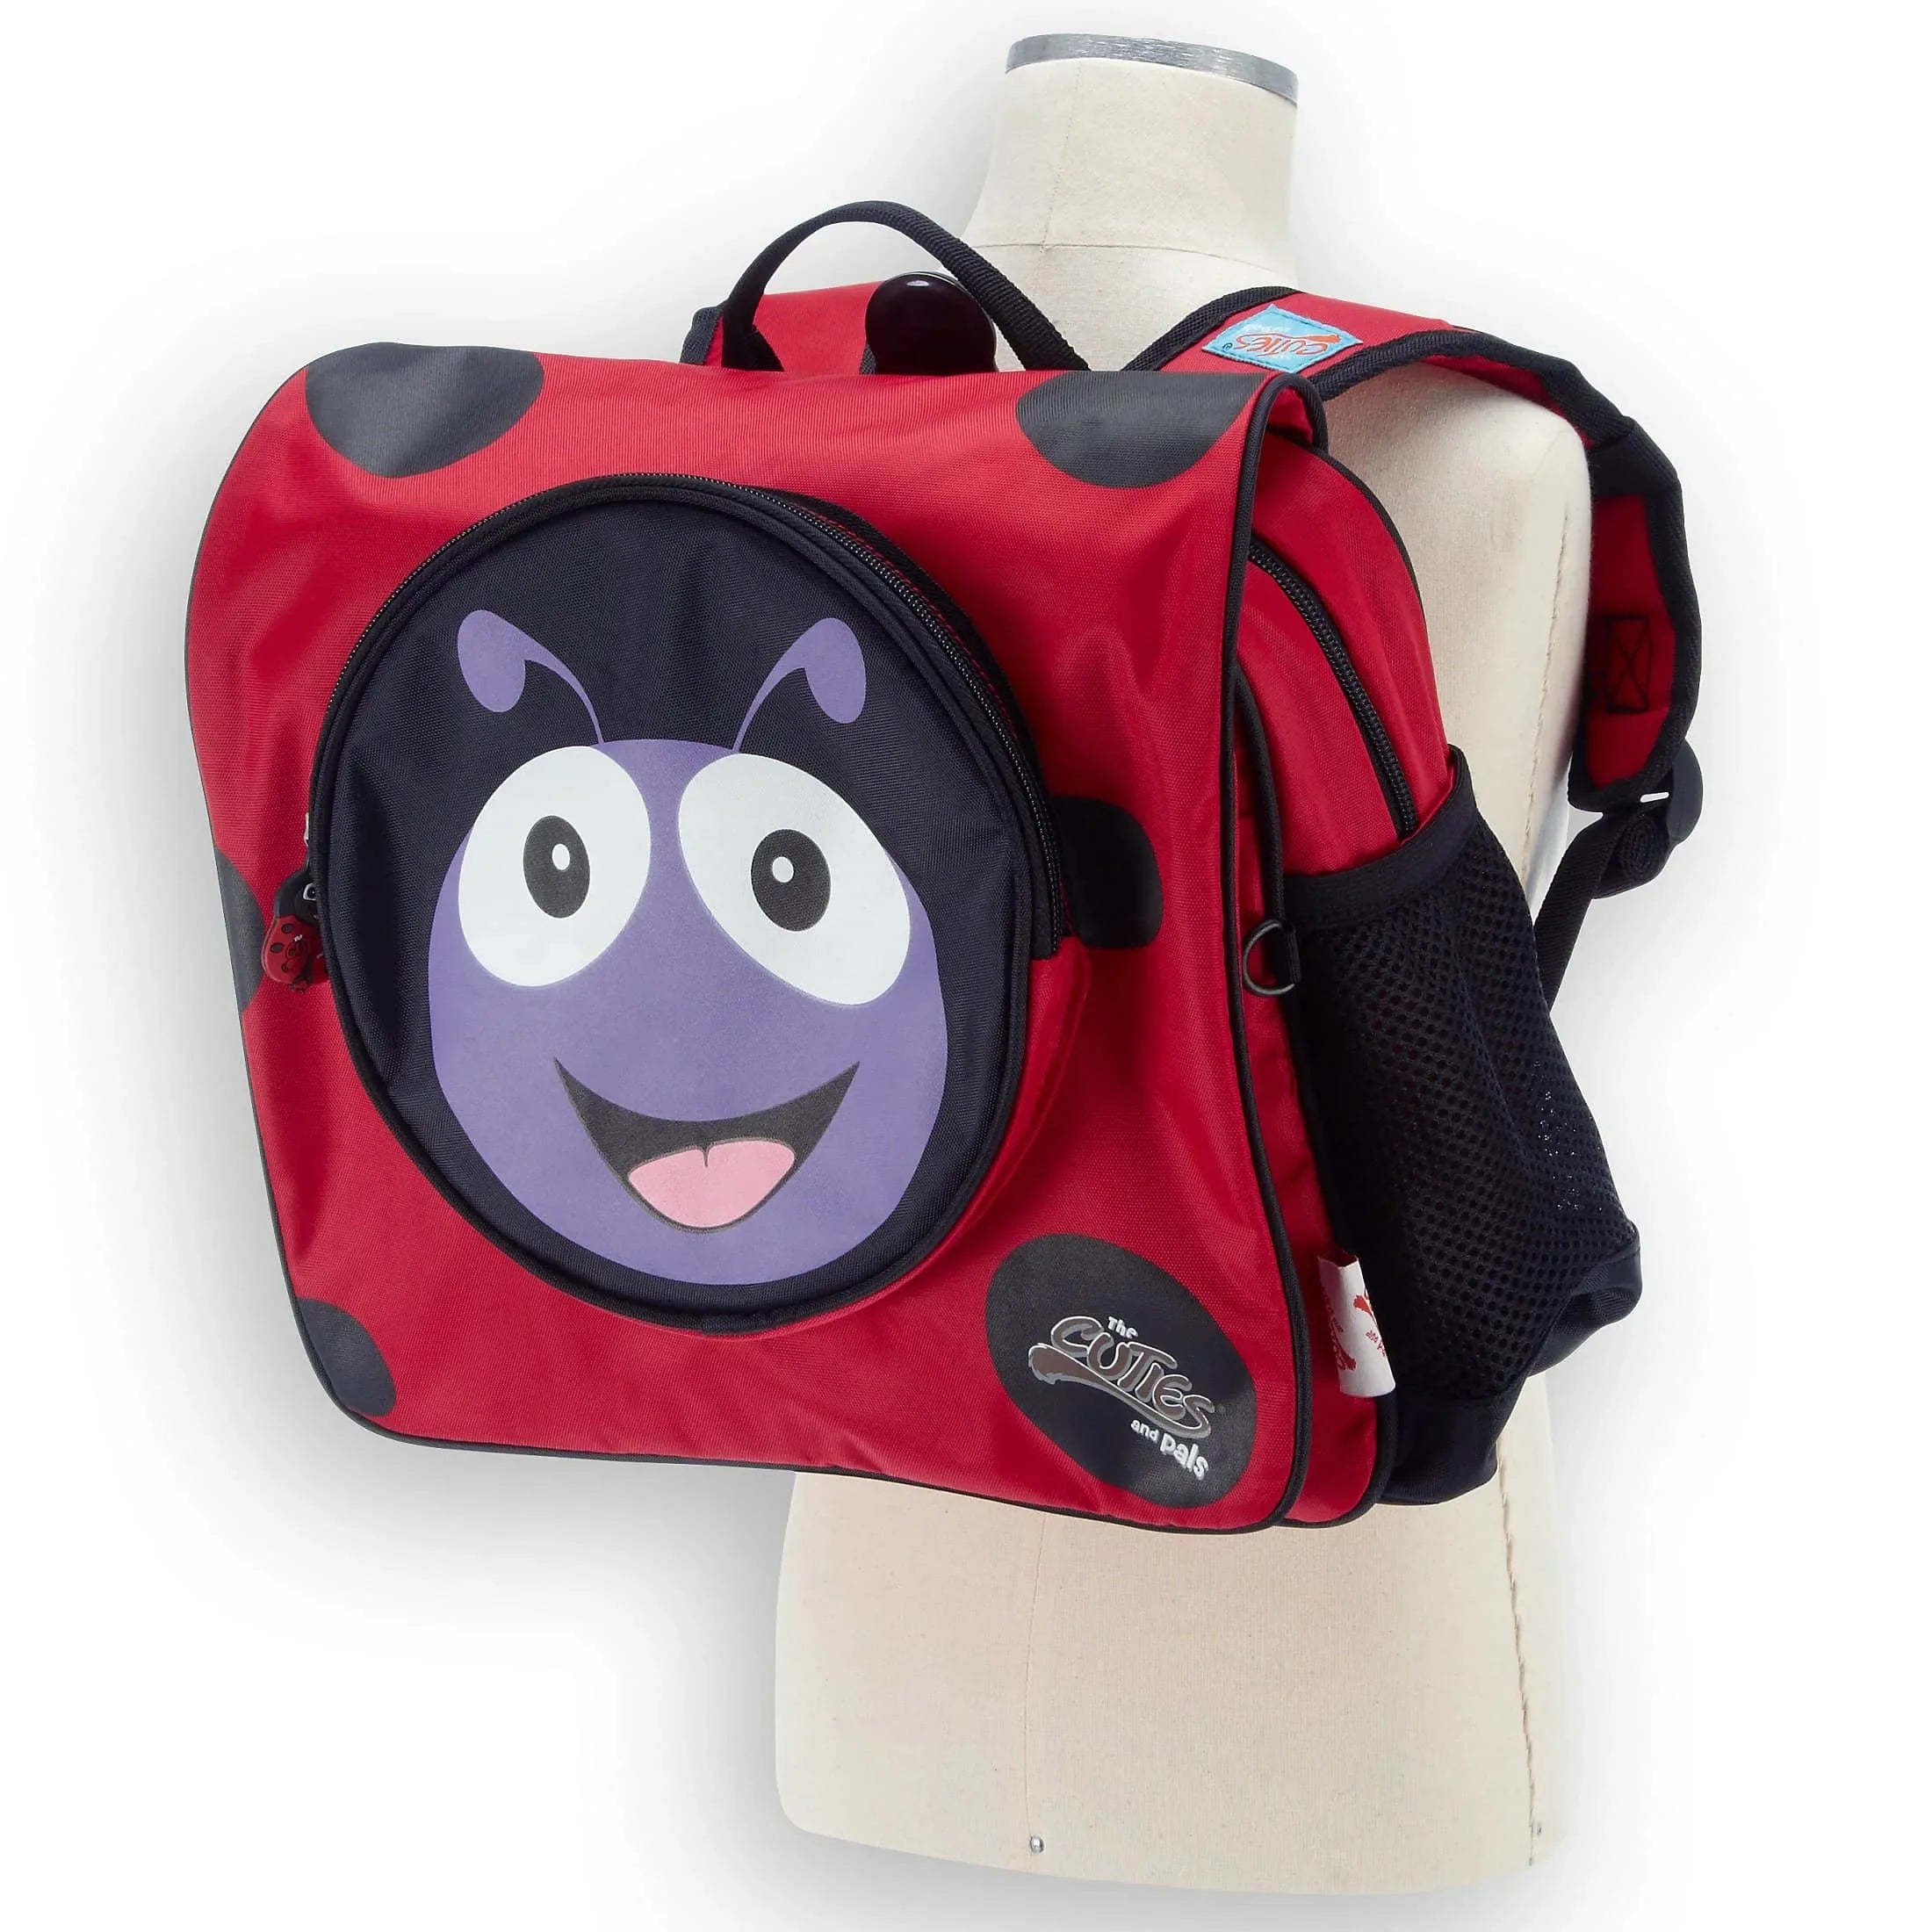 The Cuties and Pals Soft Cuties backpack 30 cm - ladybug